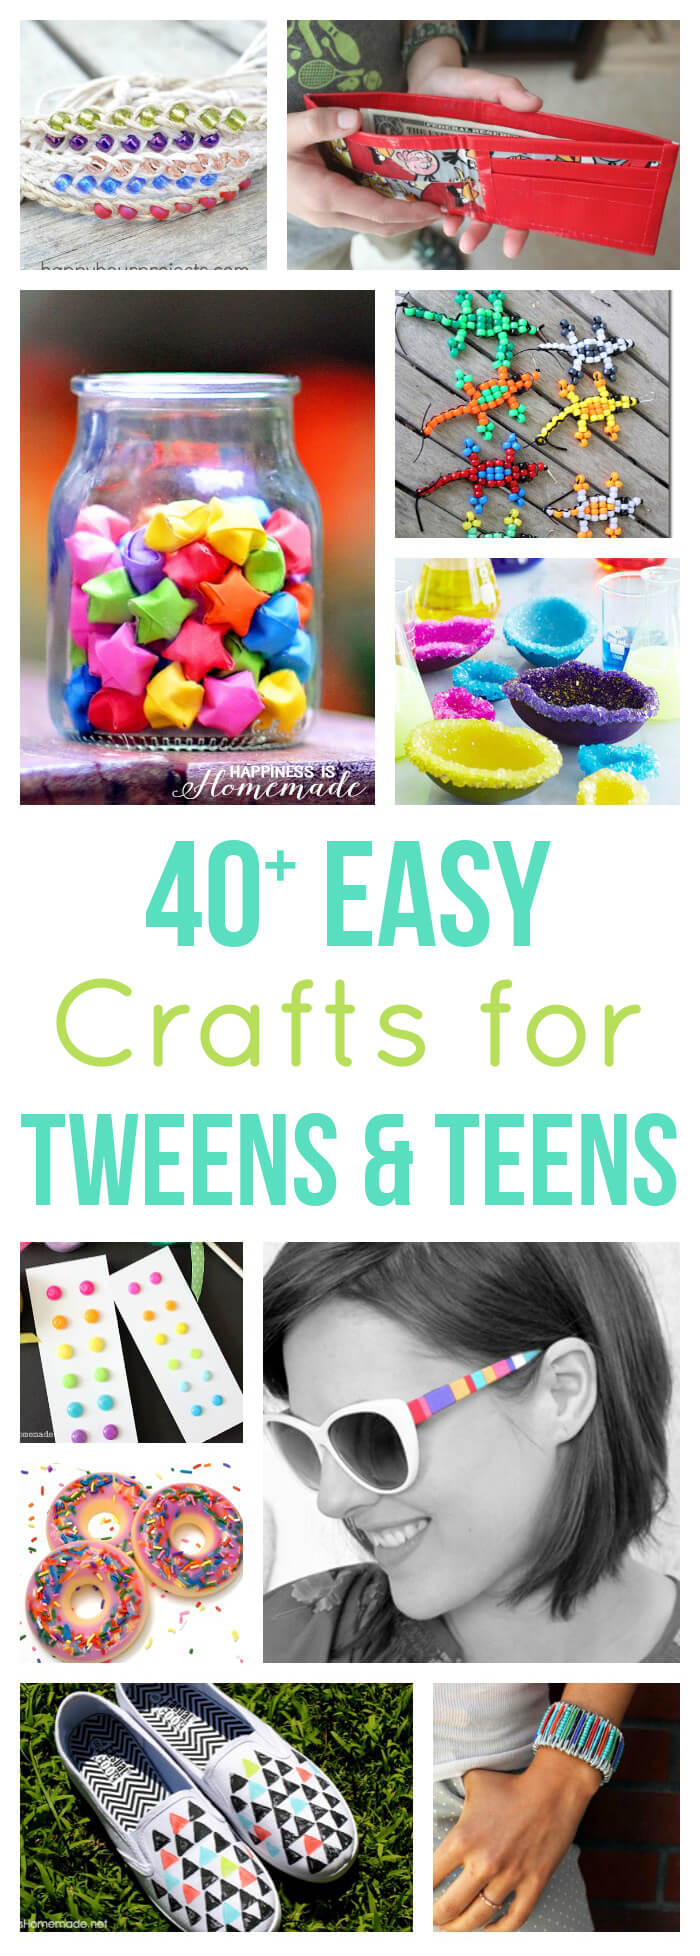 The 24 Most Fun Crafts for Tweens